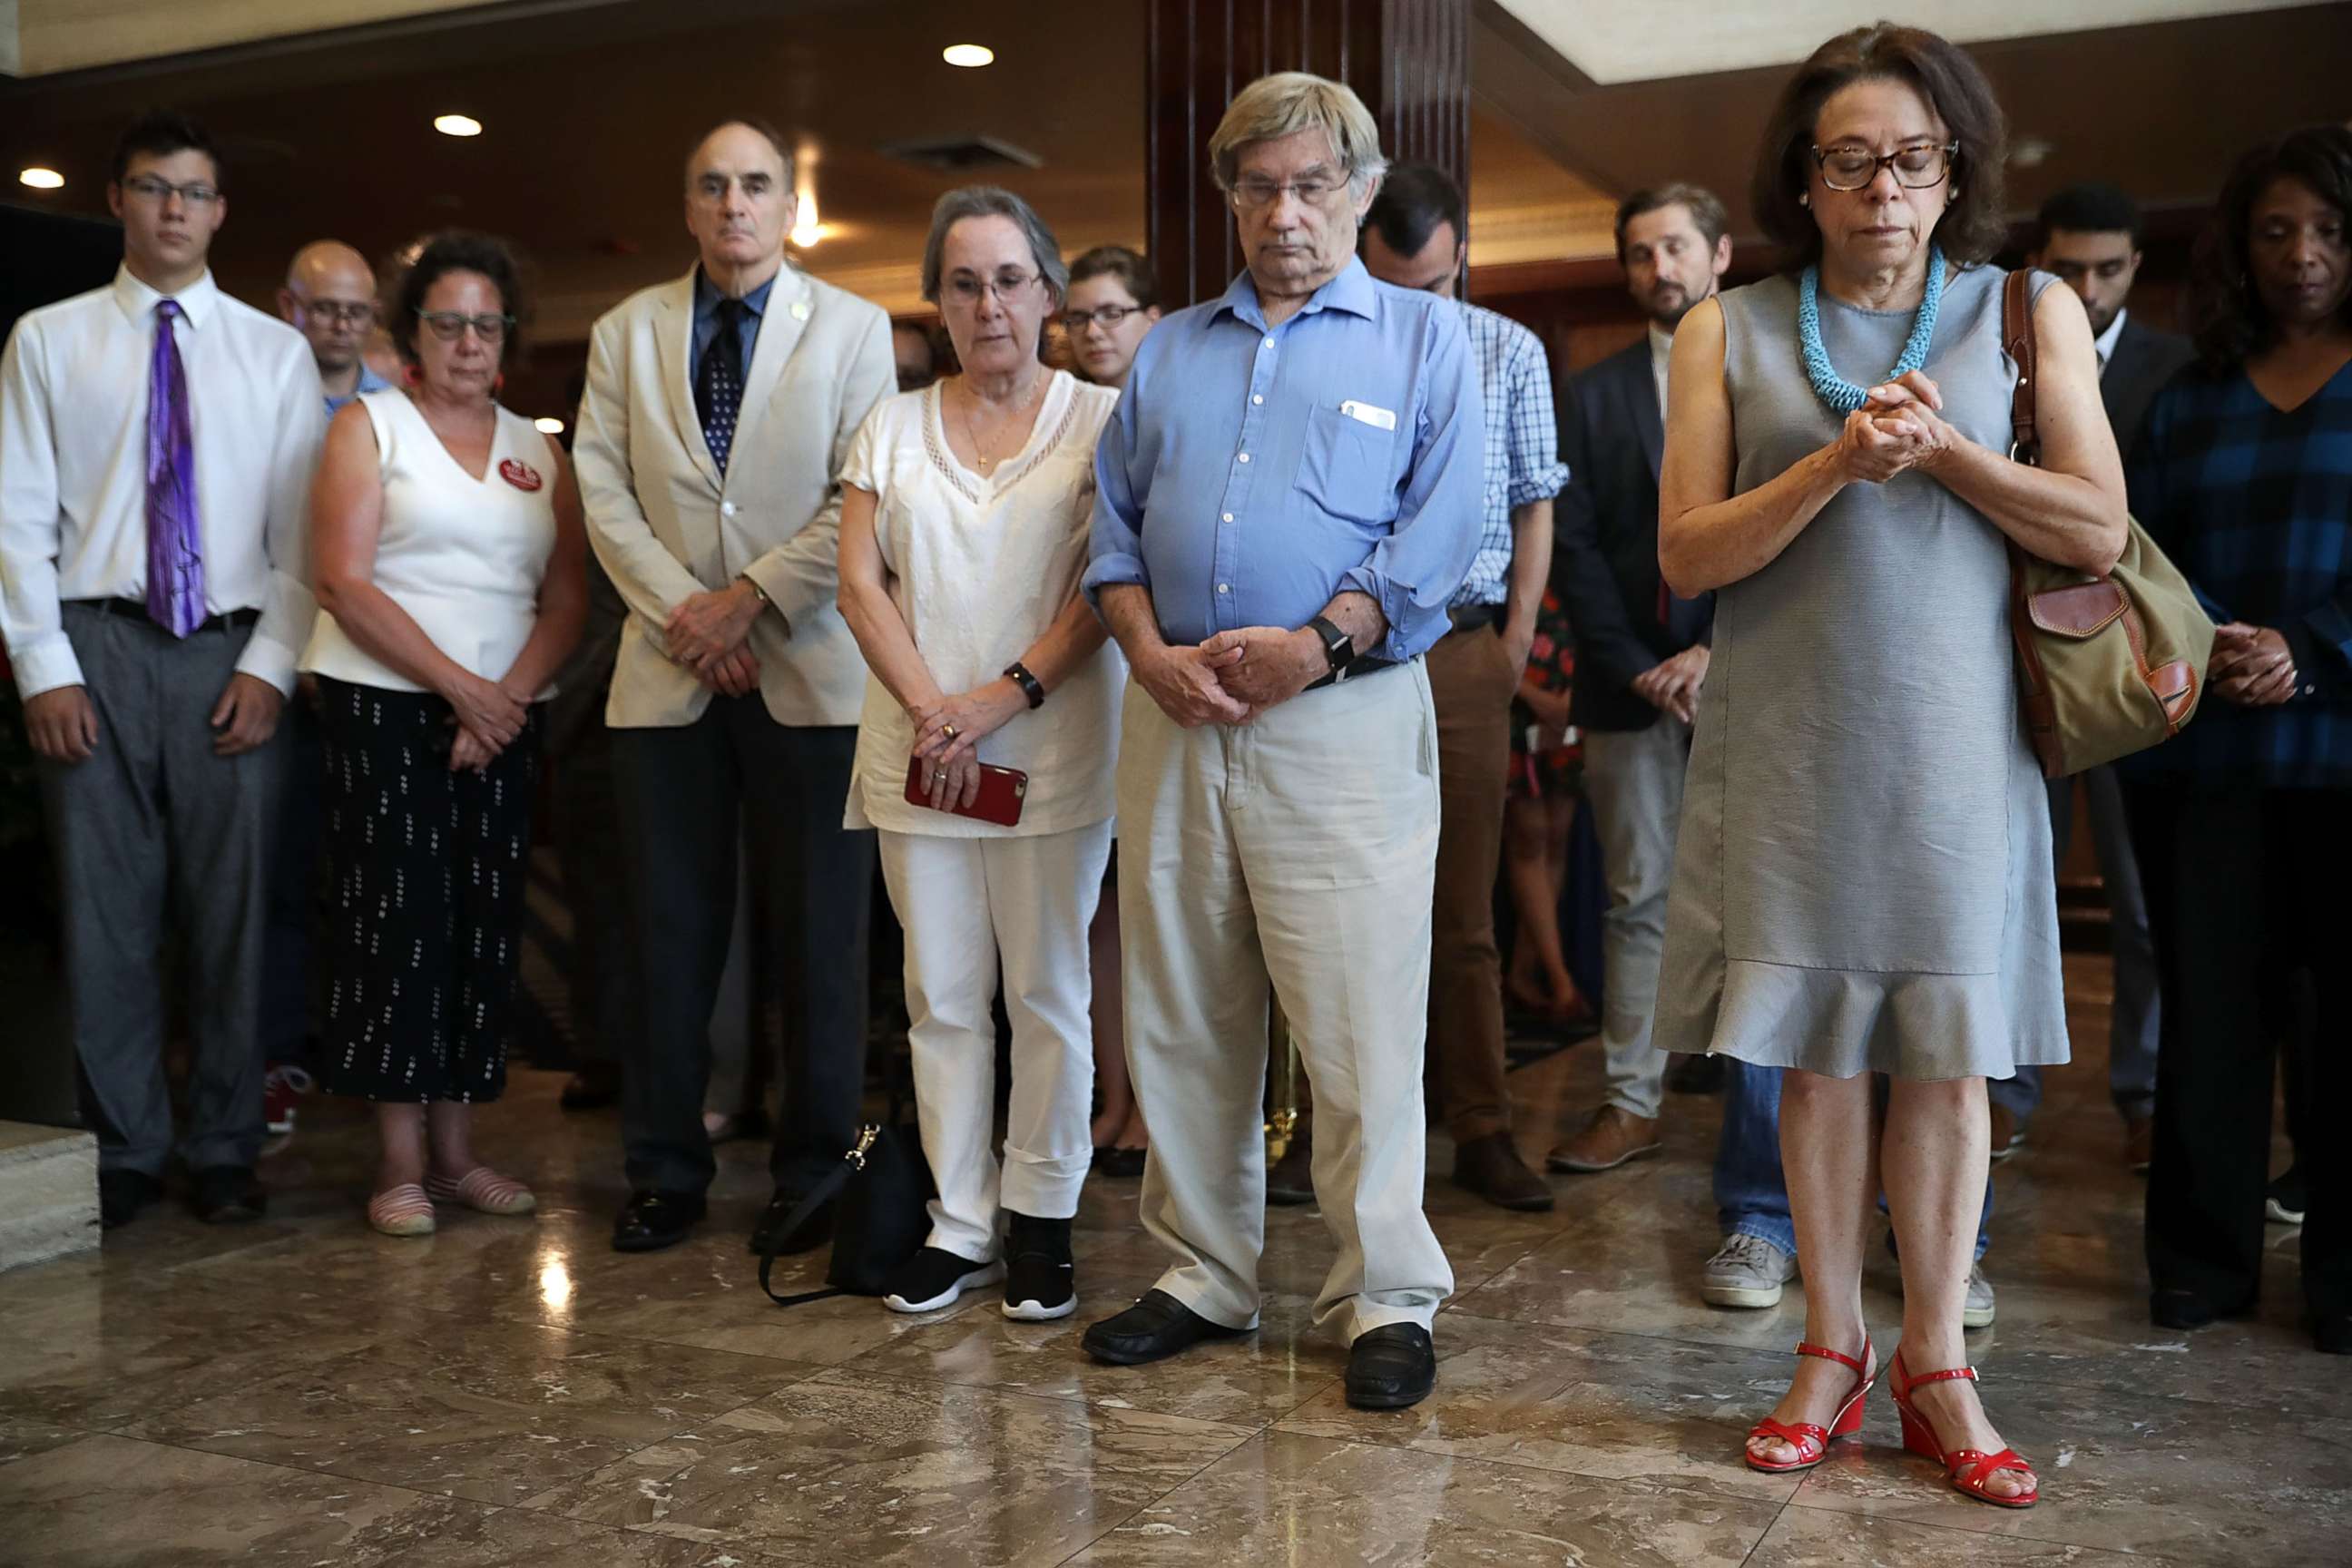 PHOTO: Members and guests of the National Press Club observe a moment of silence to honor the victims of last week's shooting at the Annapolis Capital Gazette newspaper July 5, 2018 in Washington, DC.